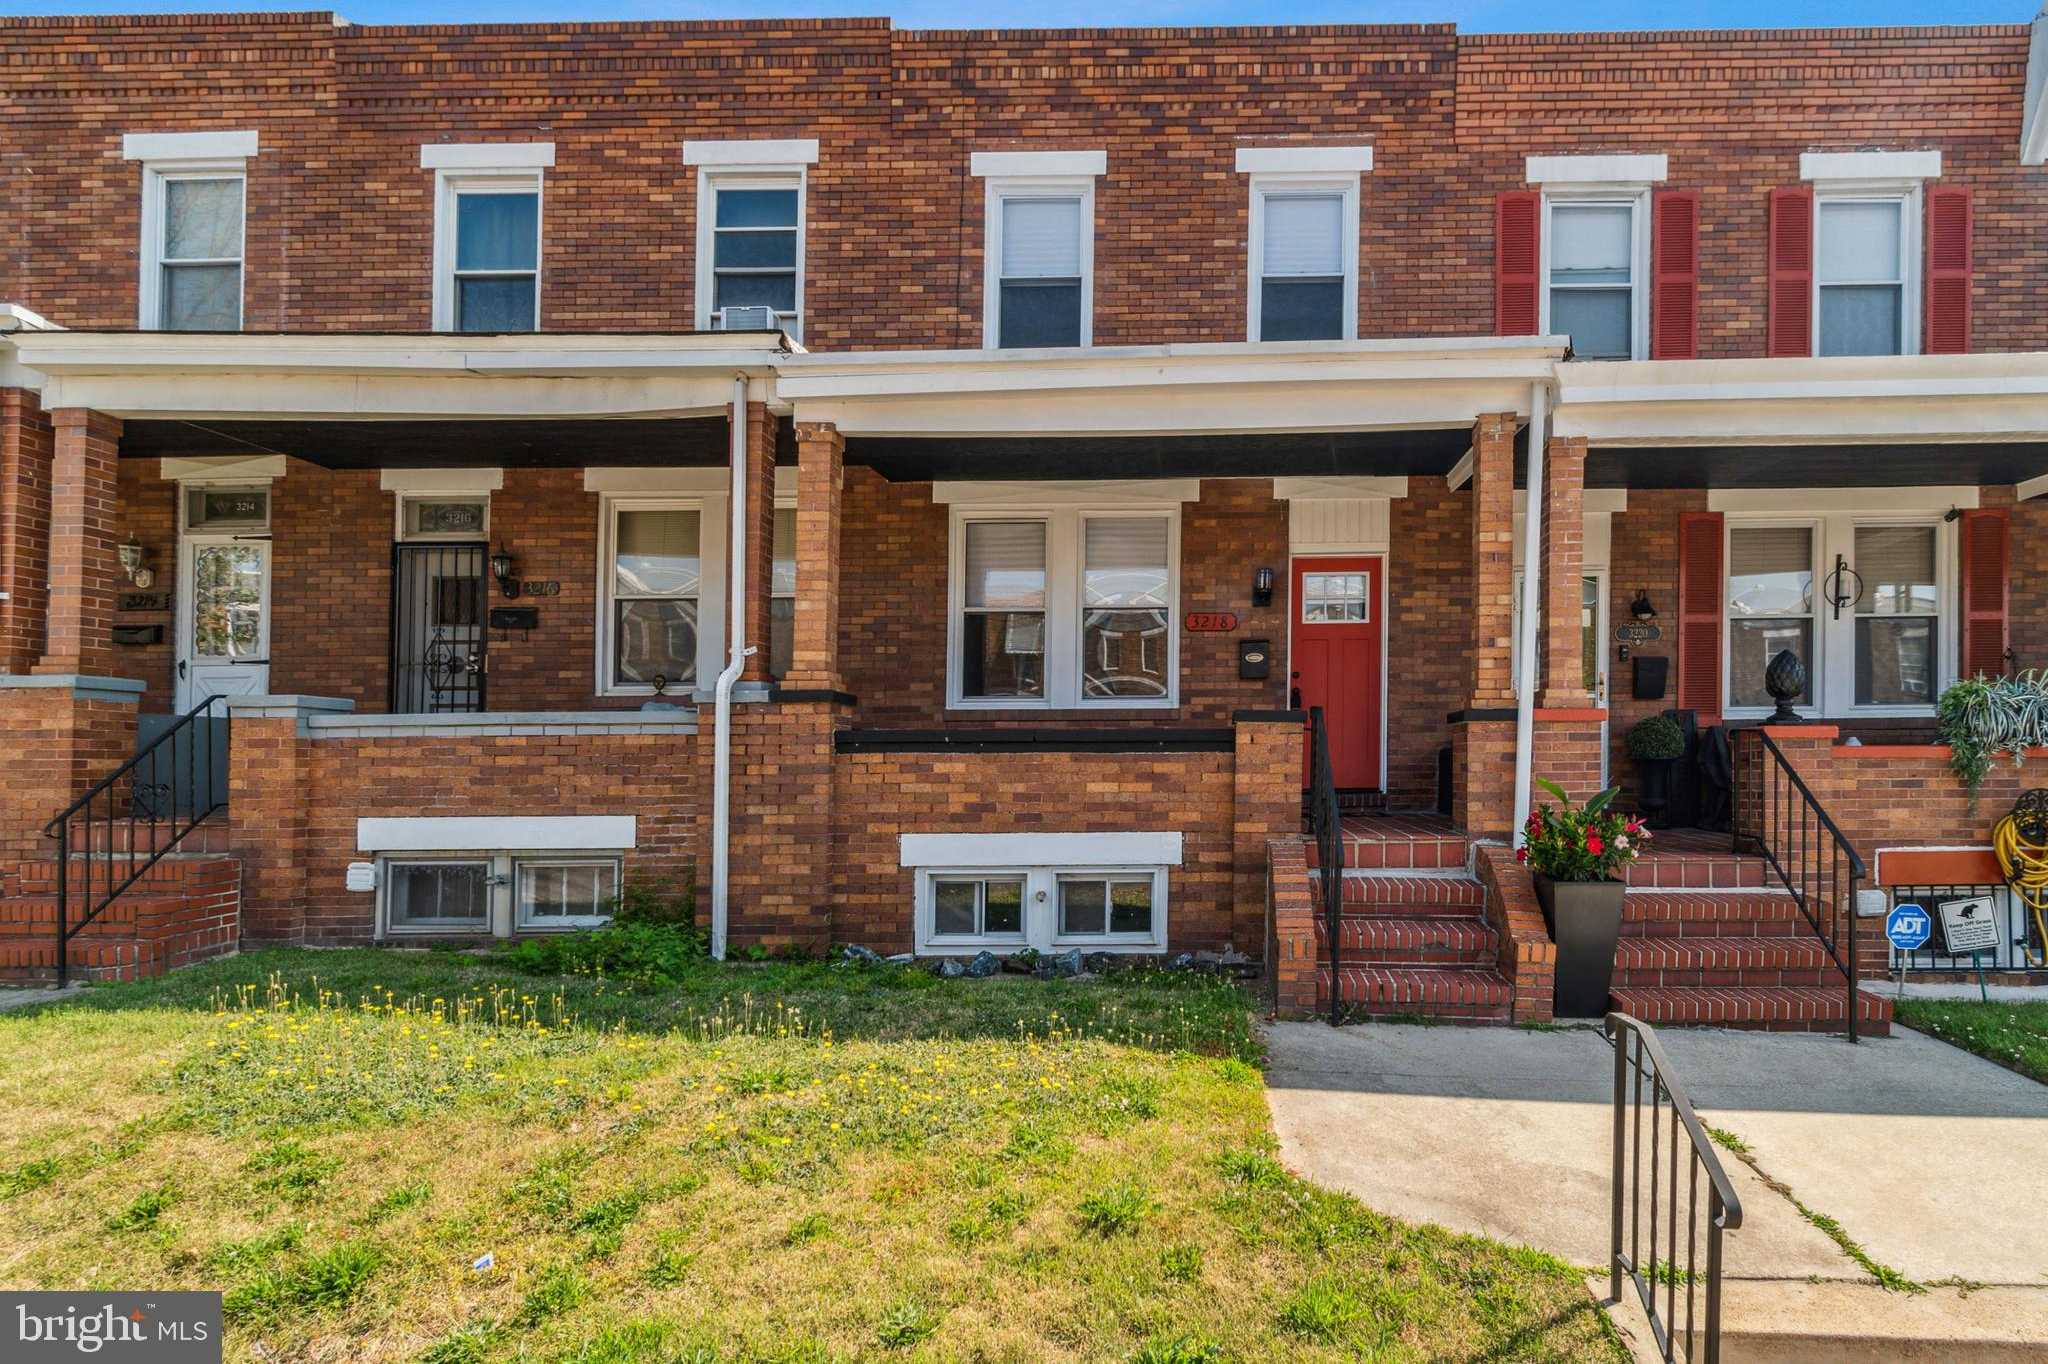 View BALTIMORE, MD 21213 townhome